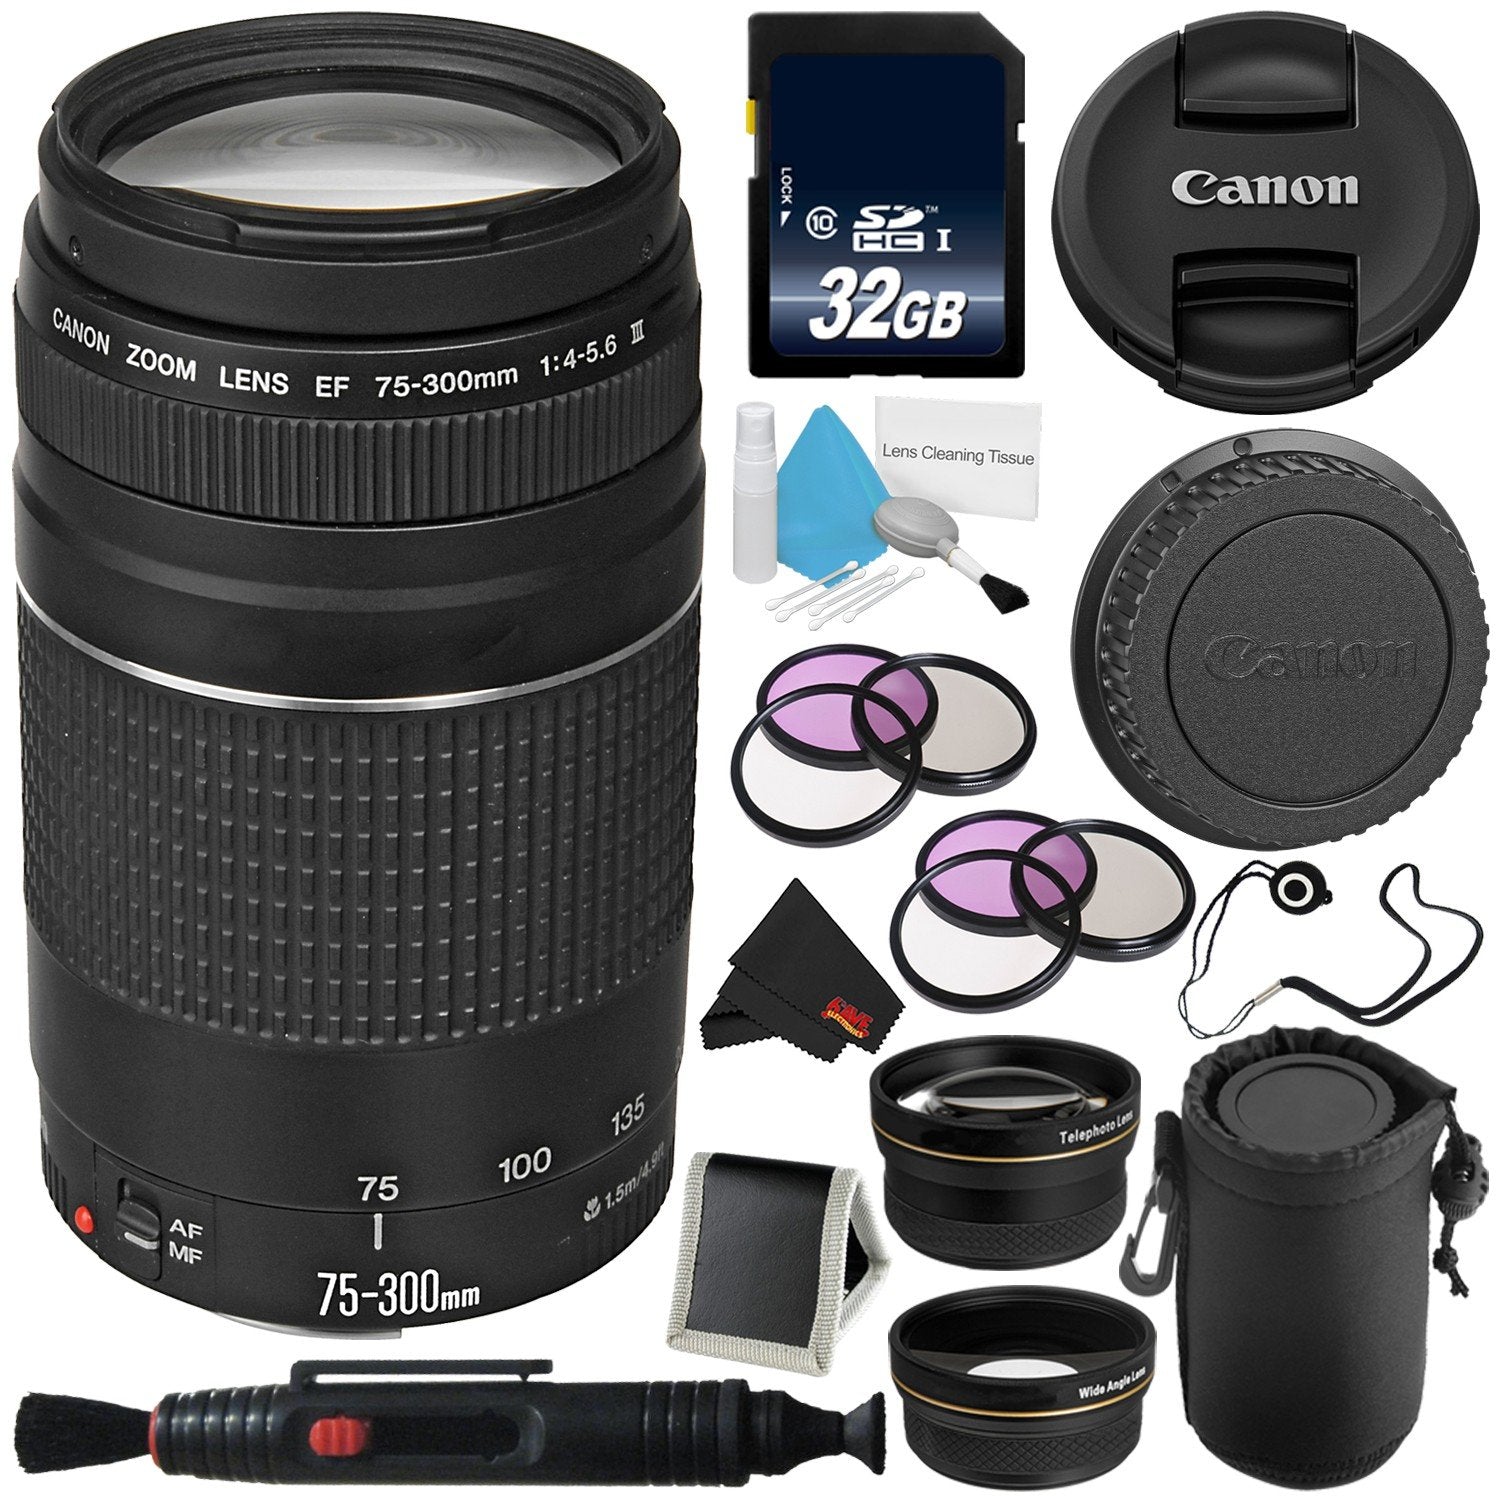 Canon EF 75-300mm f/4-5.6 III Telephoto Zoom Lens 6473A003 + Lens Pen Cleaner + Deluxe Lens Pouch + 58mm 3 Piece Filter